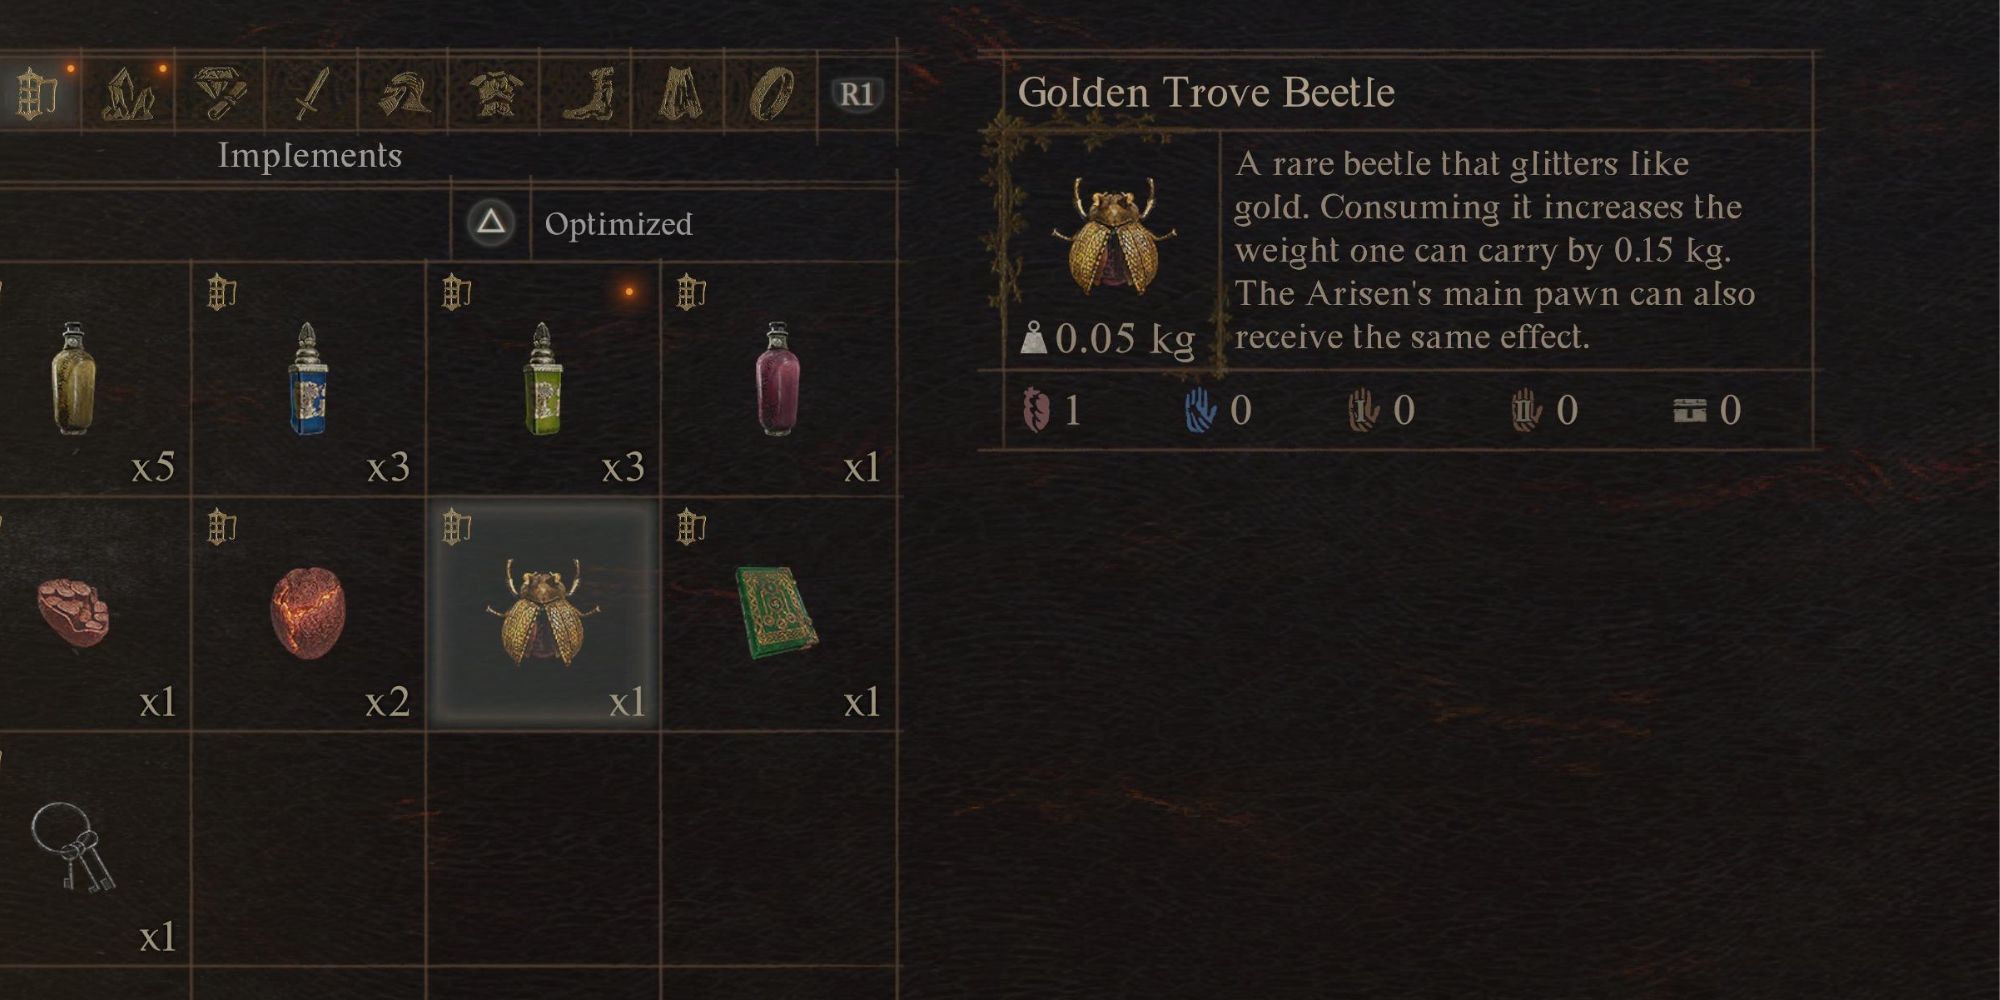 Golden Trove Beetle in Dragon’s Dogma 2